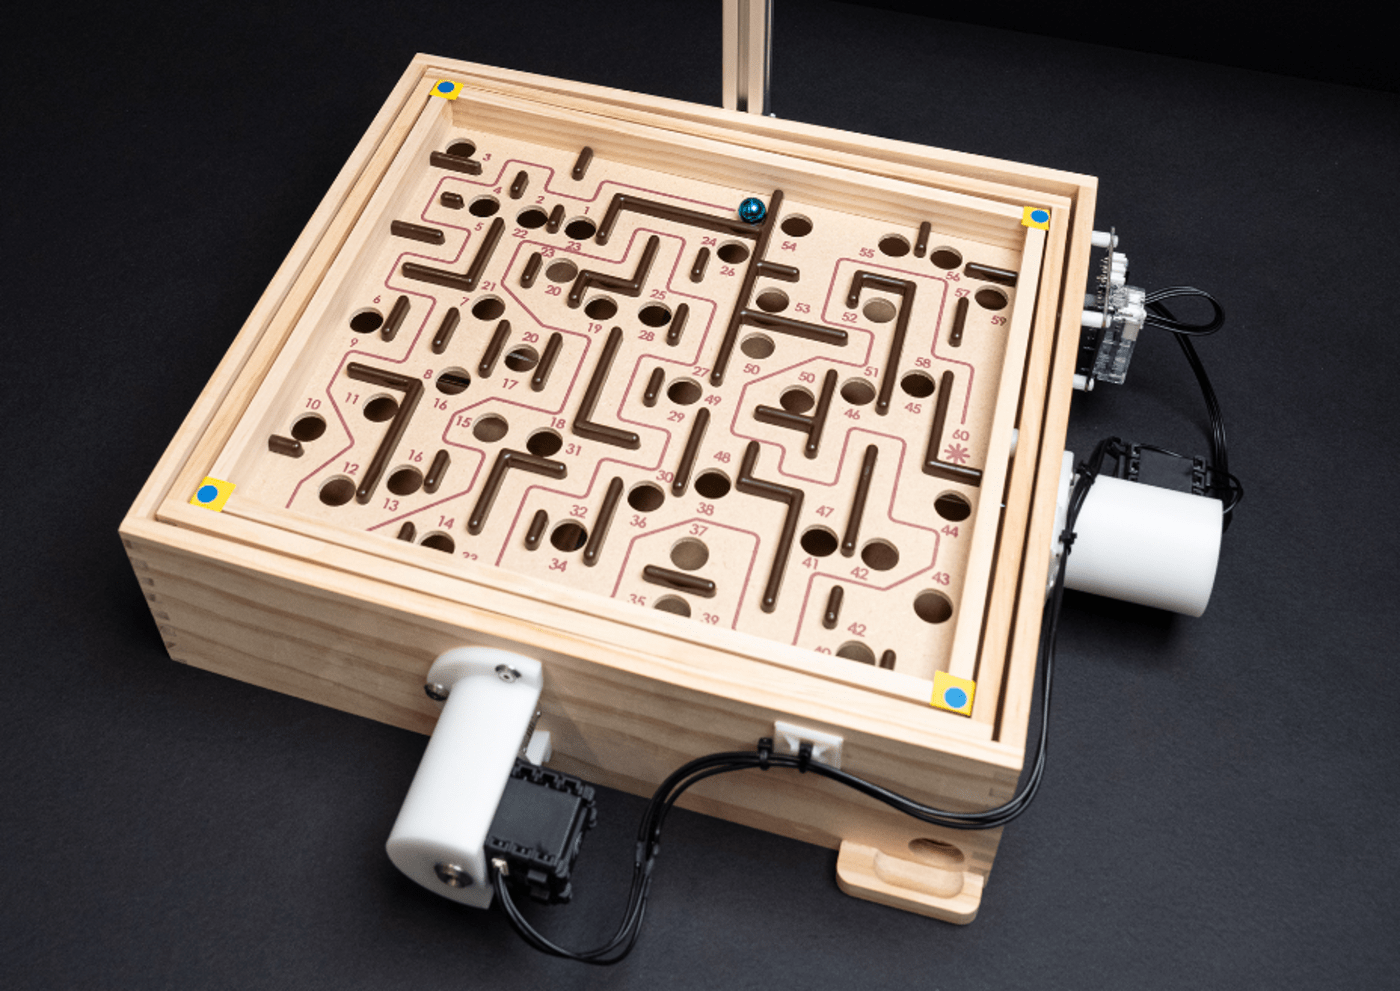 Watch an AI robot learn how to demolish humans at a marble maze game